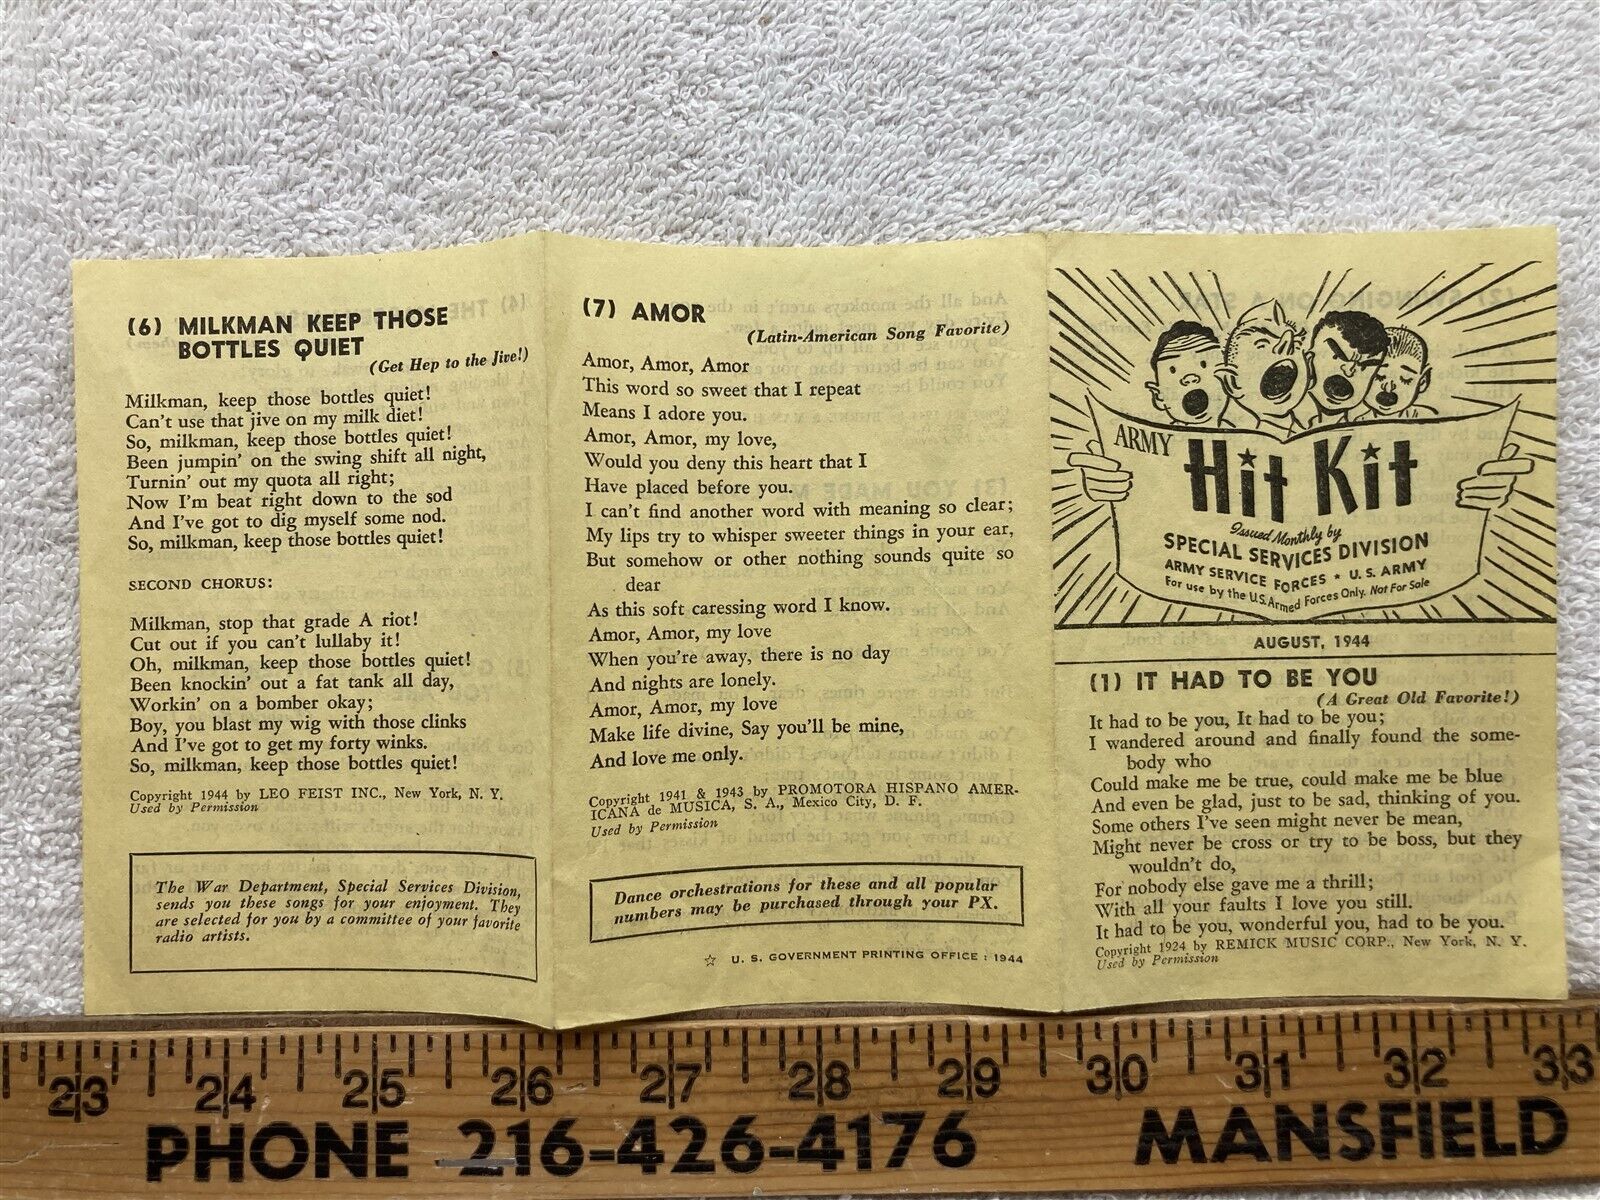 1944 August Army Hit Kit Song Lyrics Print Sheet WWII Soldier 